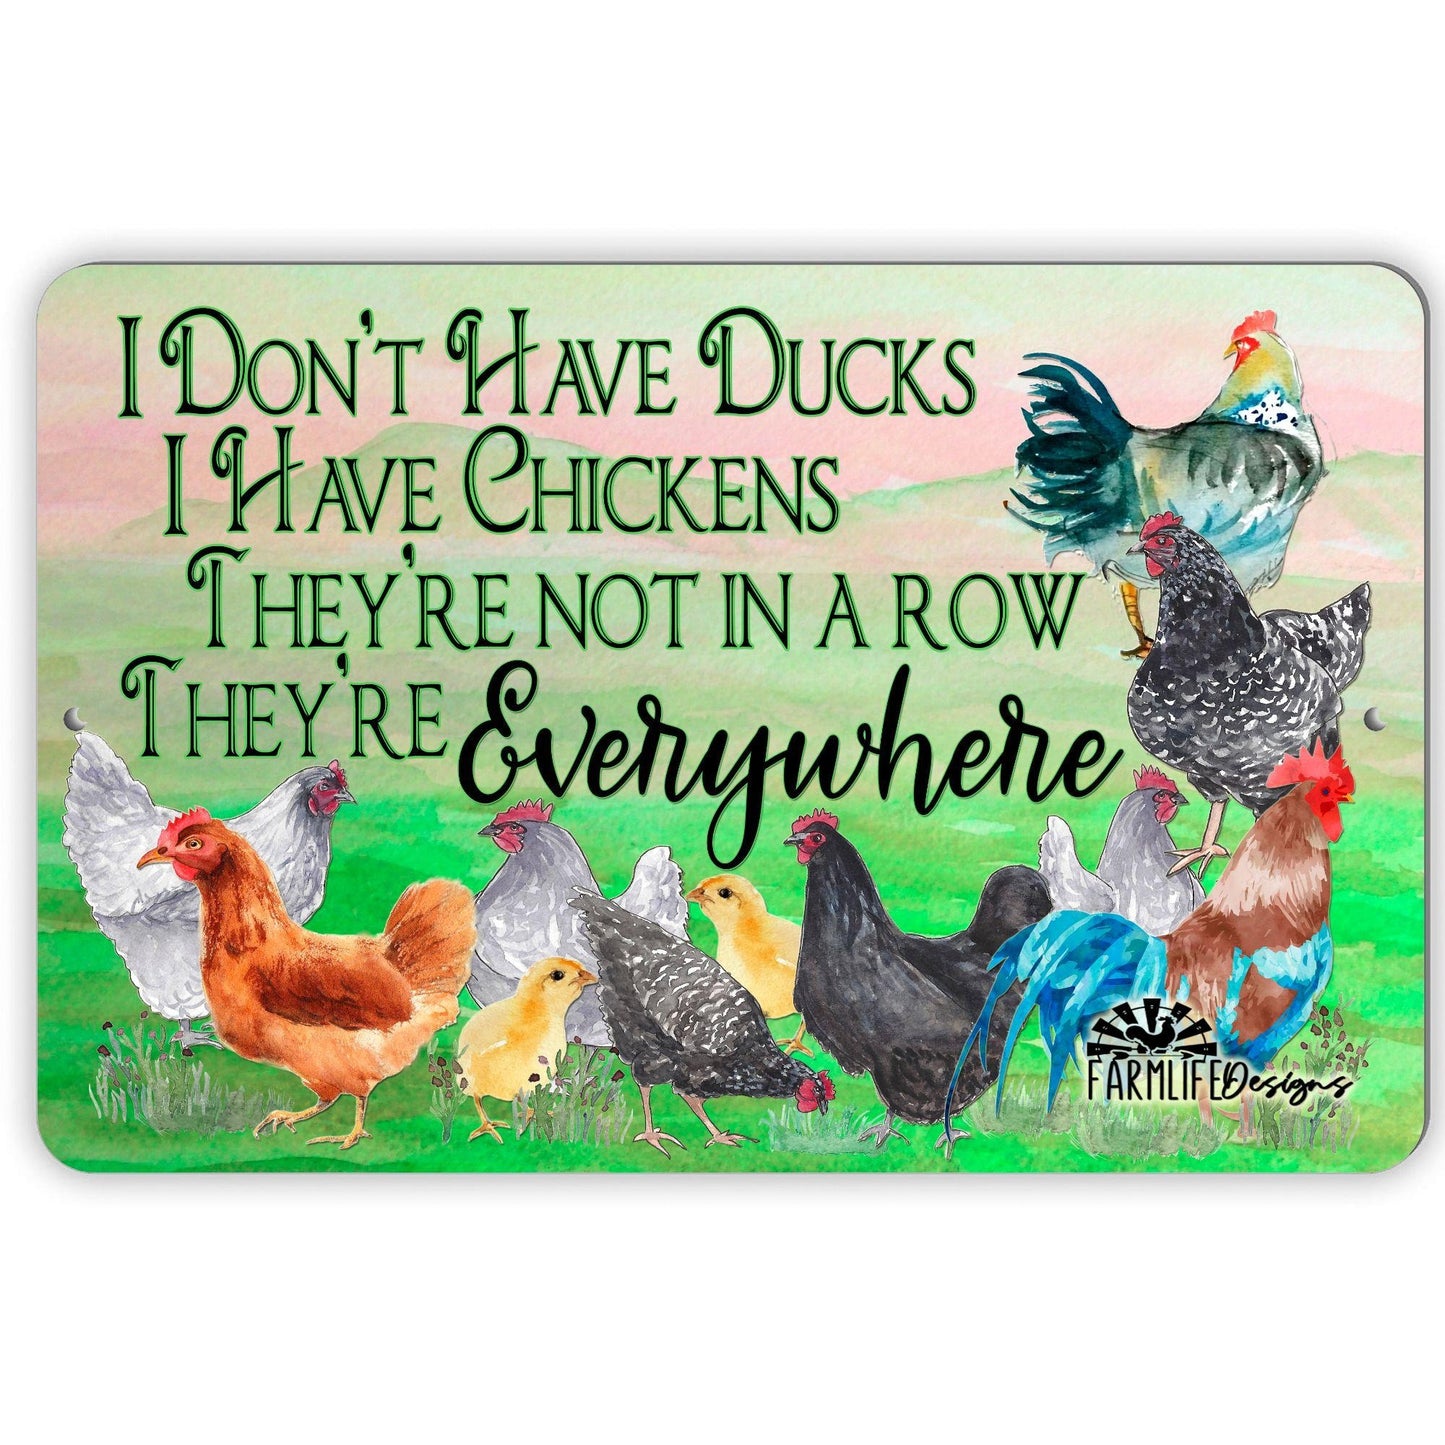 Funny Chicken Sign - I Don't Have Ducks, Chickens are Everywhere - Handmade Aluminum 12x8